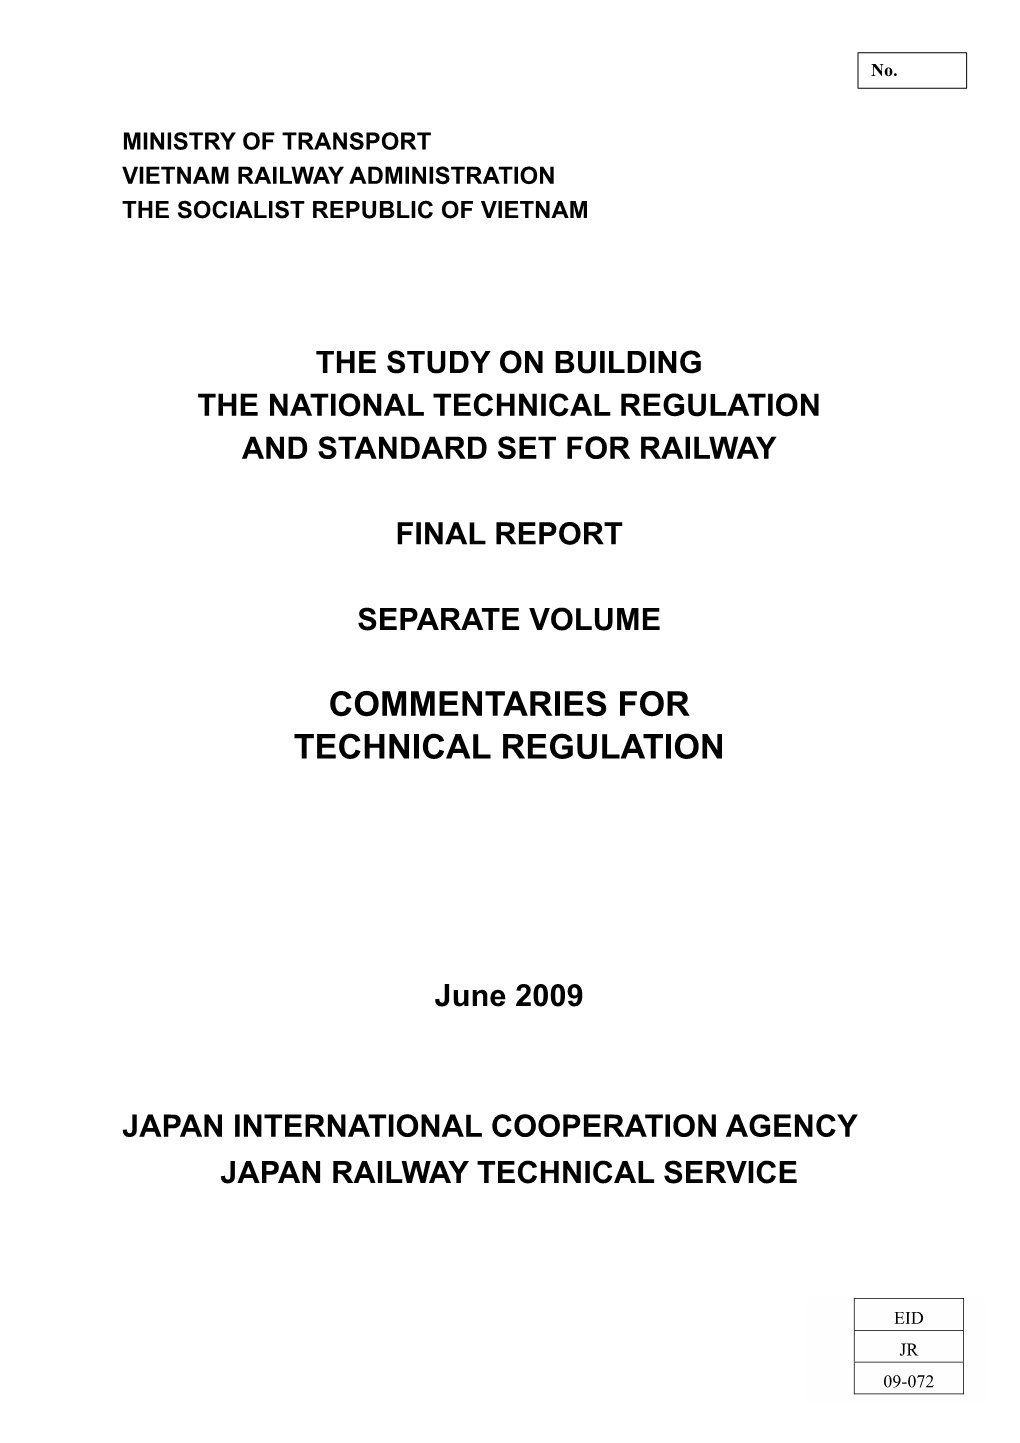 Commentaries for Technical Regulation